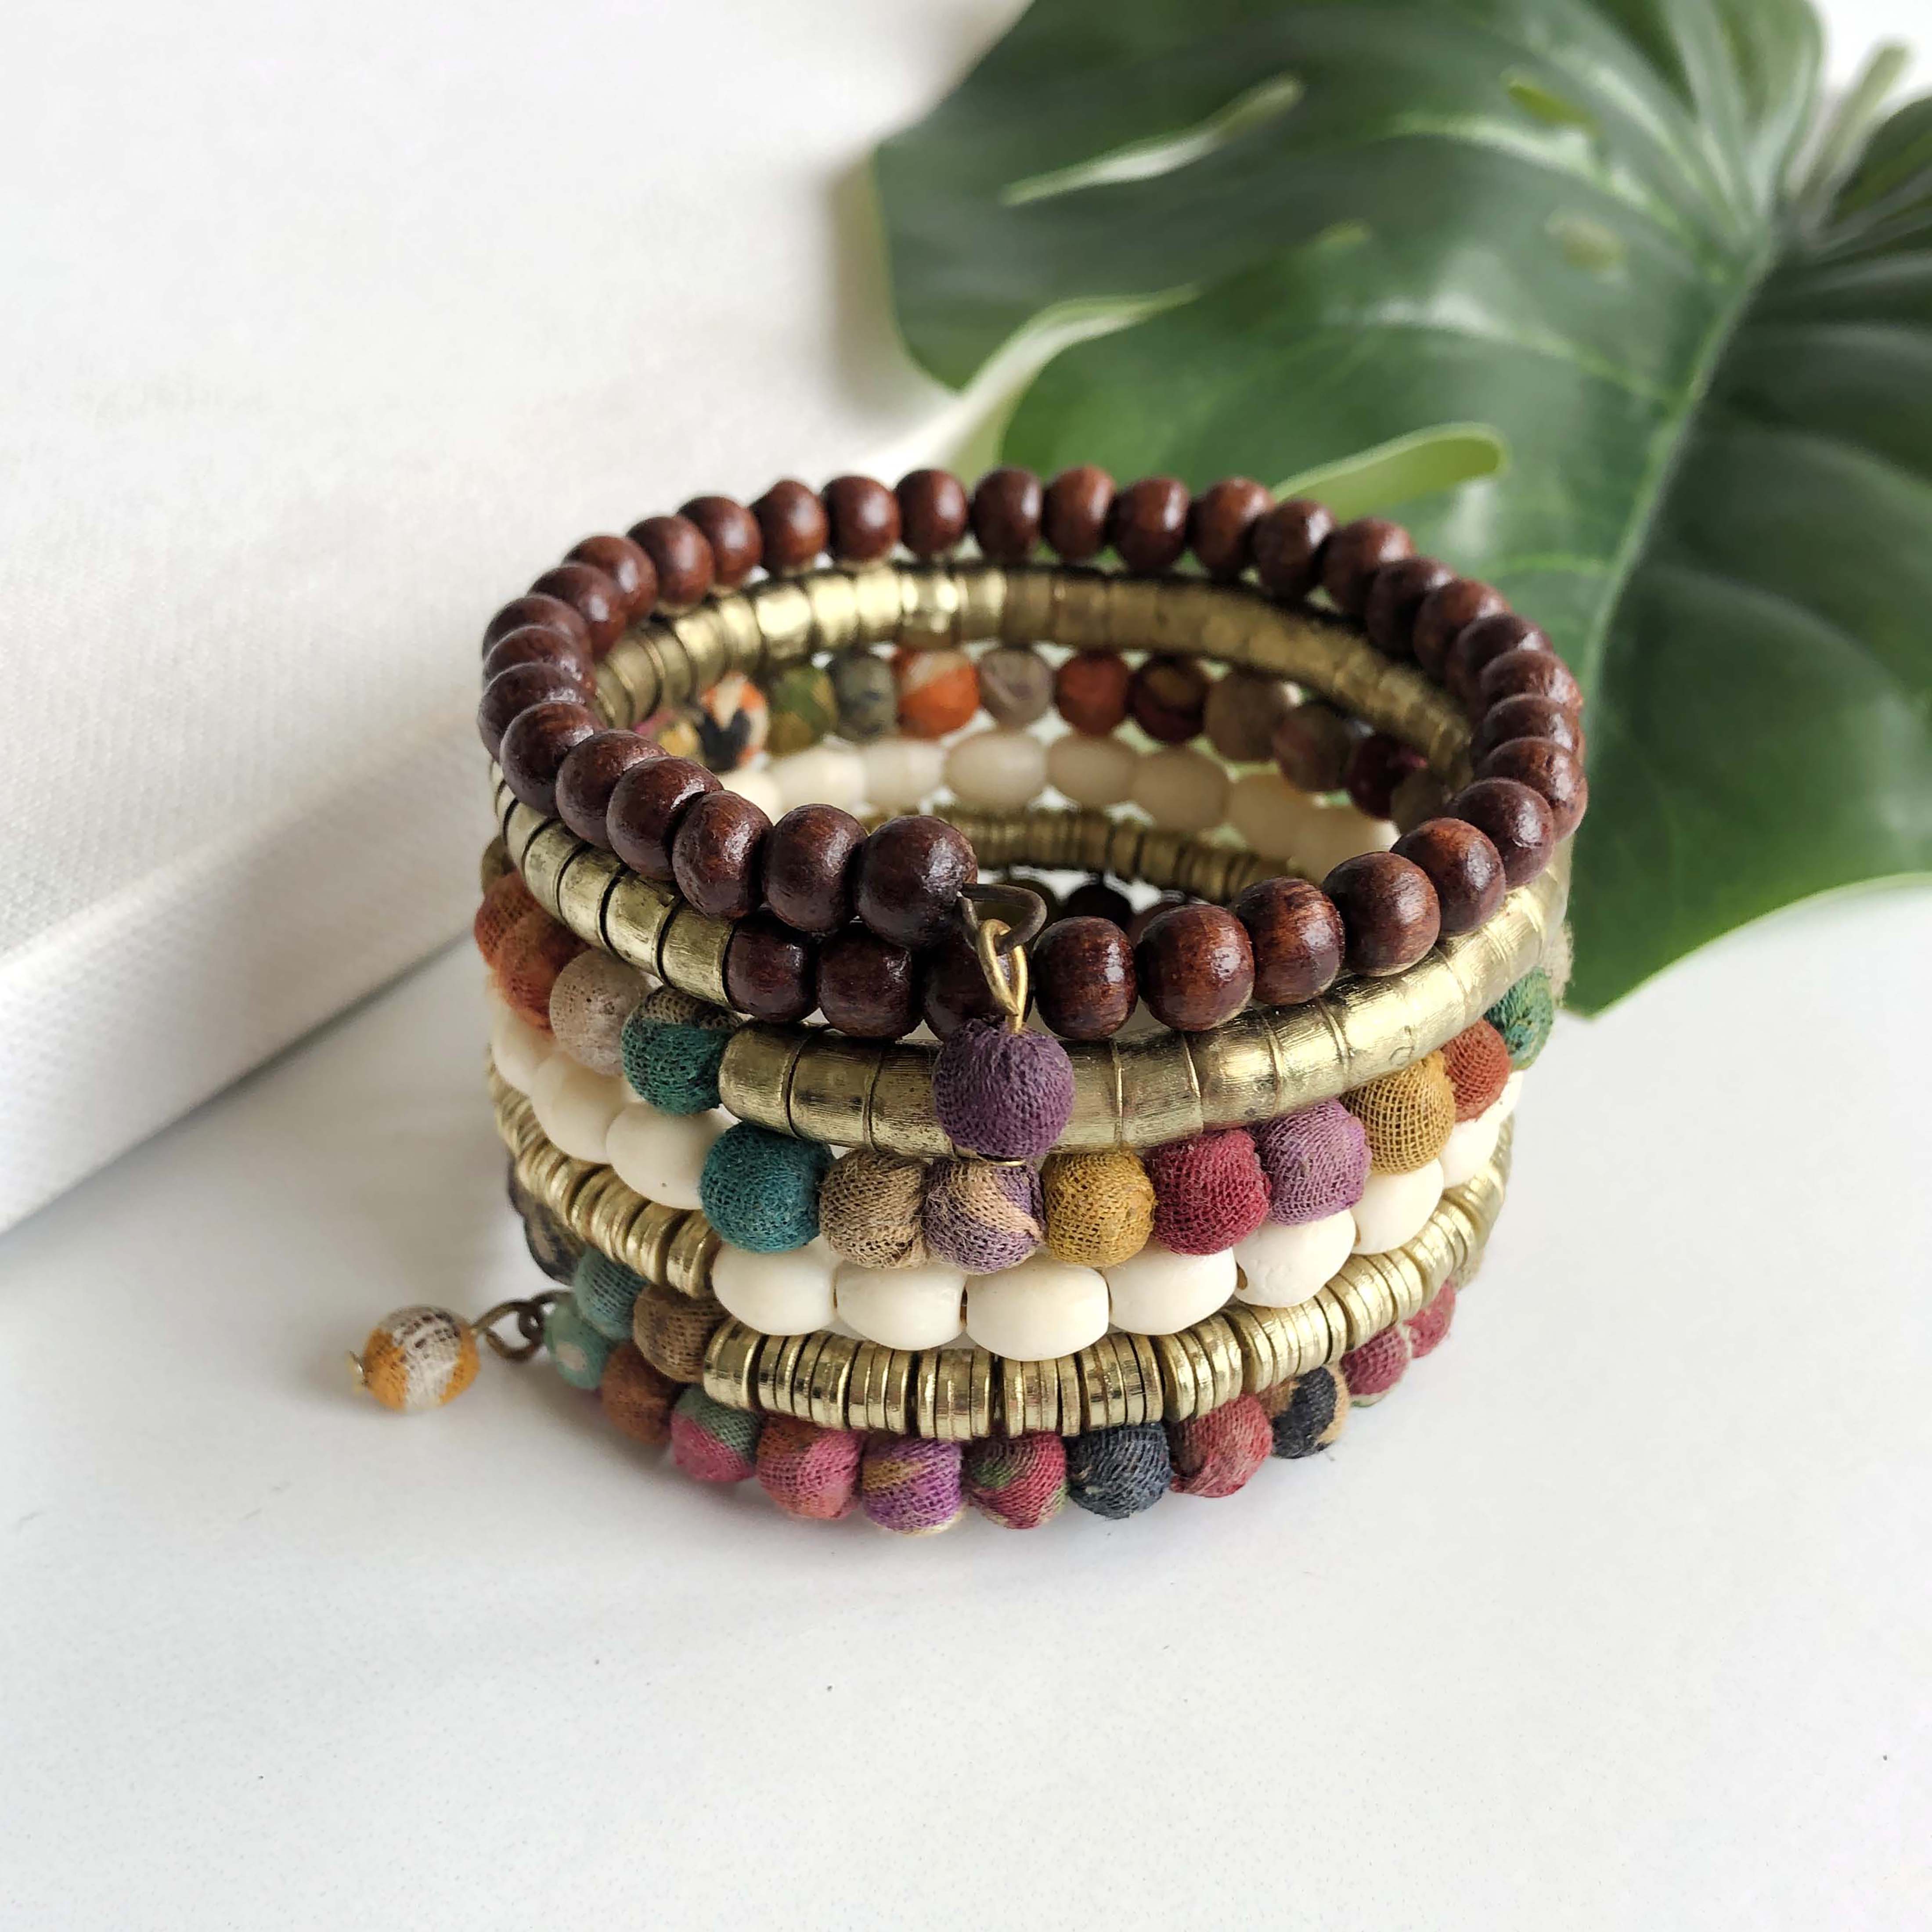 A colorful wrap-style cuff bracelet is made from wood, metallic, bone, and textile-wrapped beads.